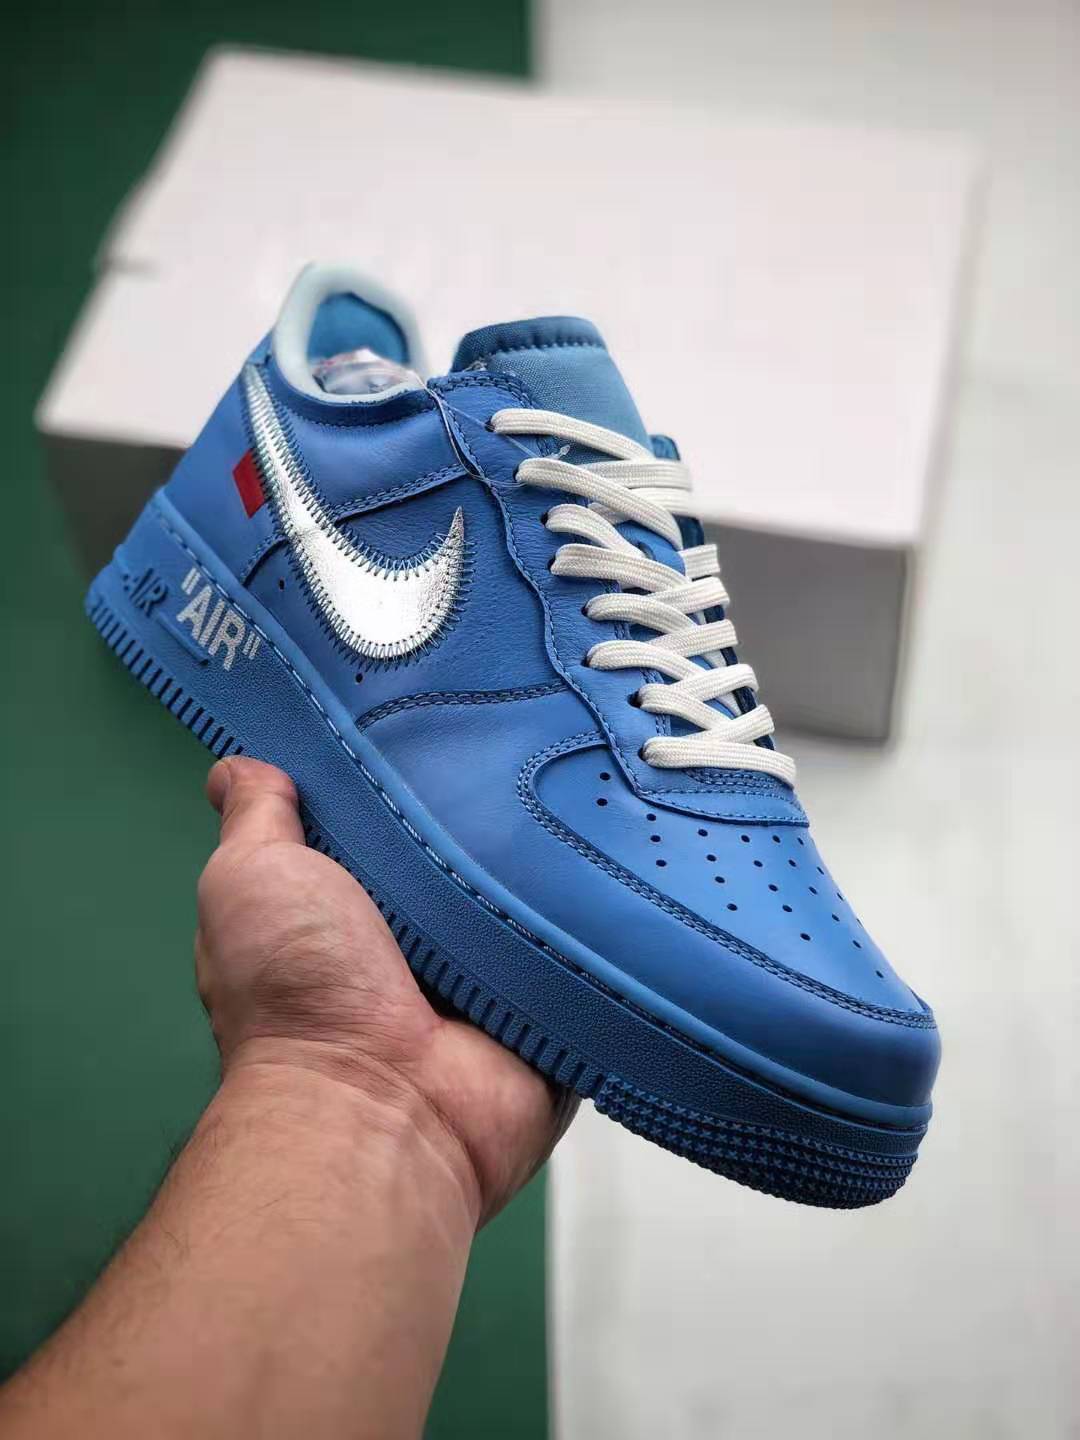 Nike Air Force 1 Low Off-White MCA University Blue - Limited Edition Sneakers